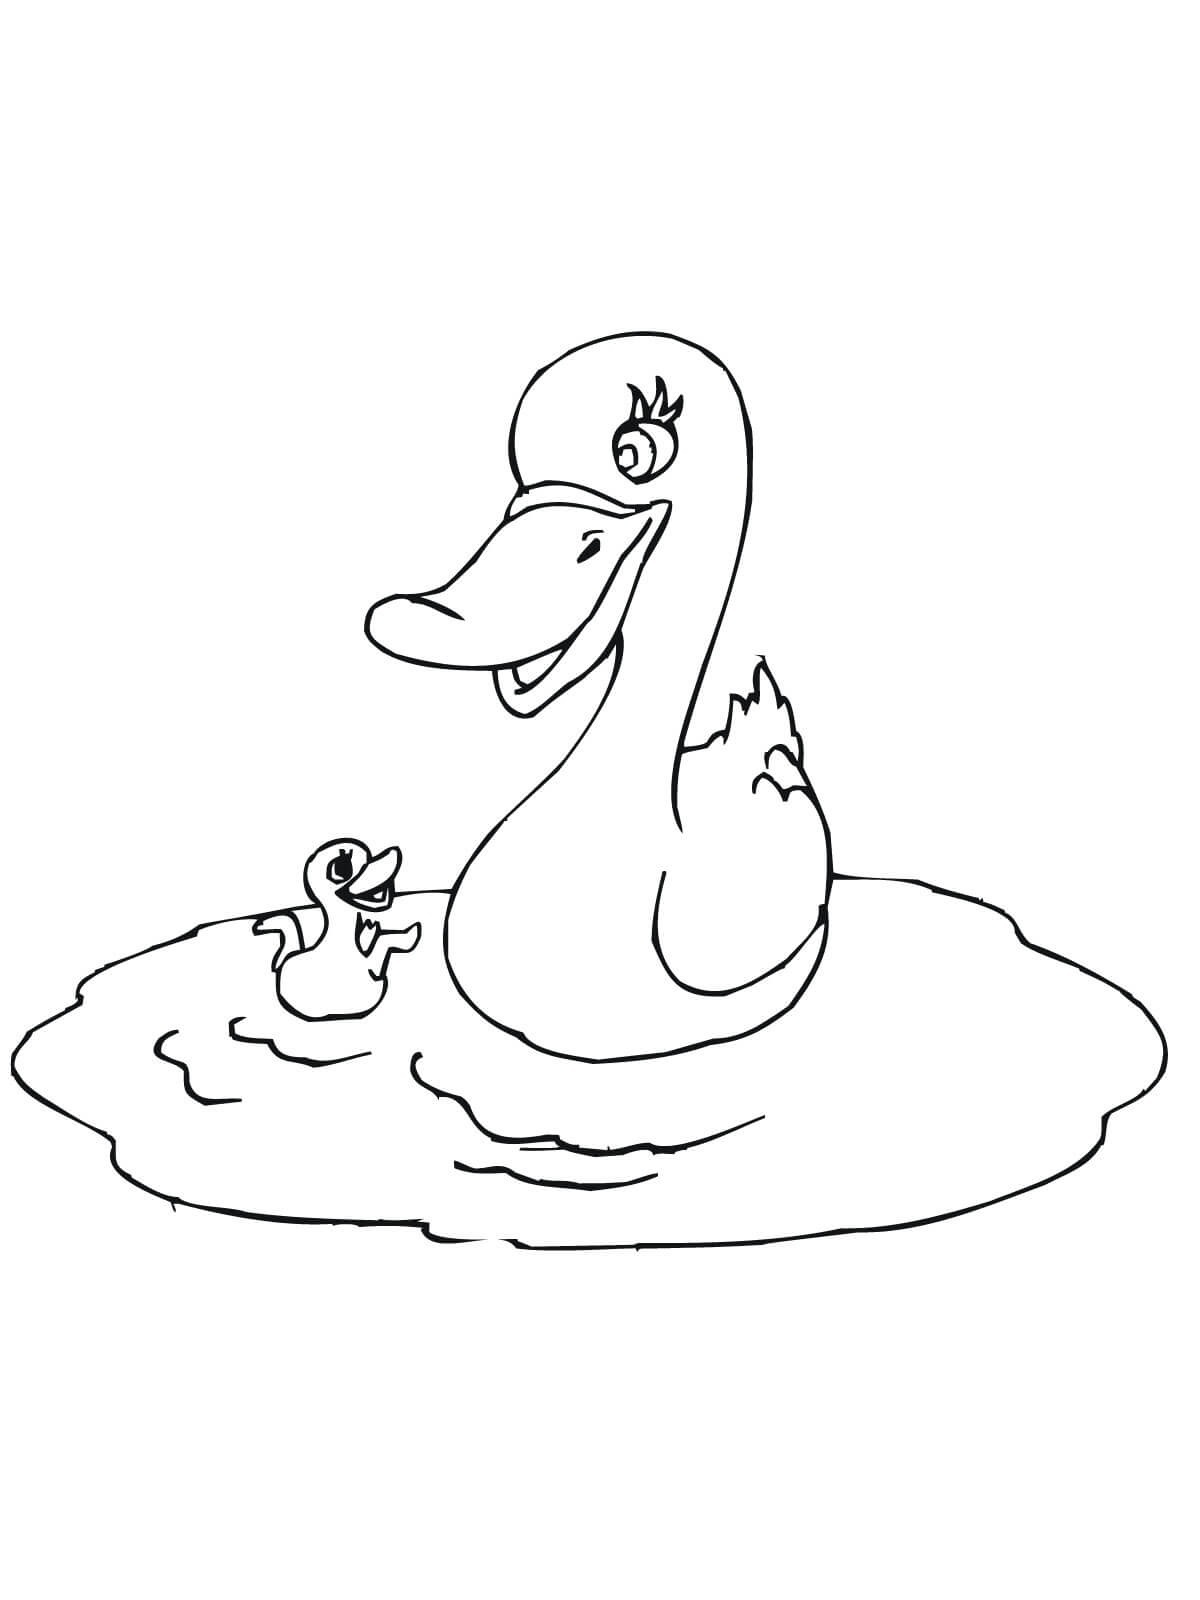 Mother duck with baby play in the pond Coloring Pages